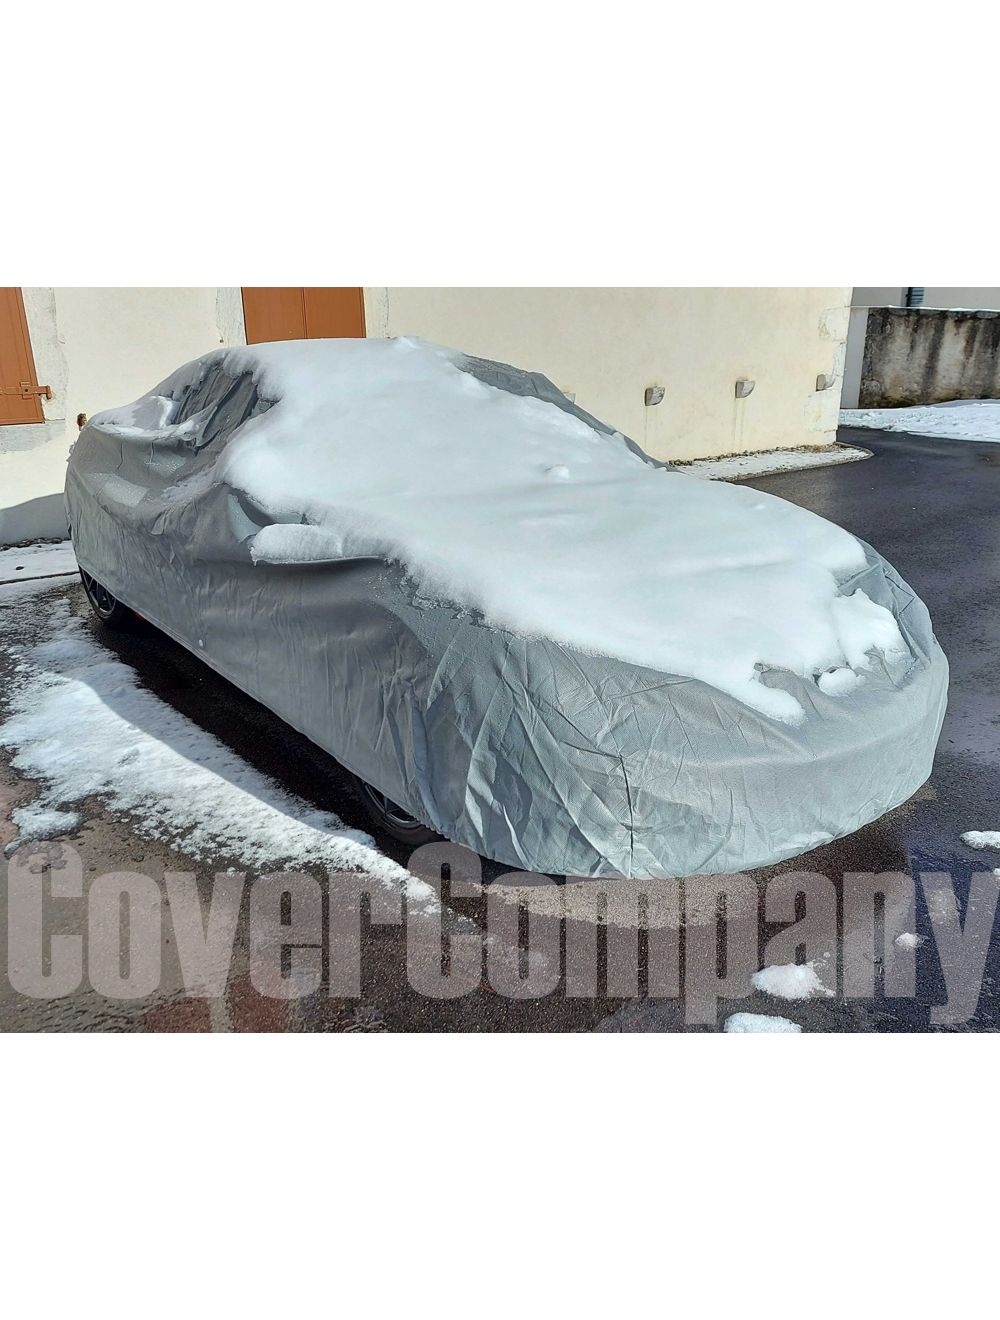 Outdoor Car Cover for Aston Martin. Waterproof Car Cover